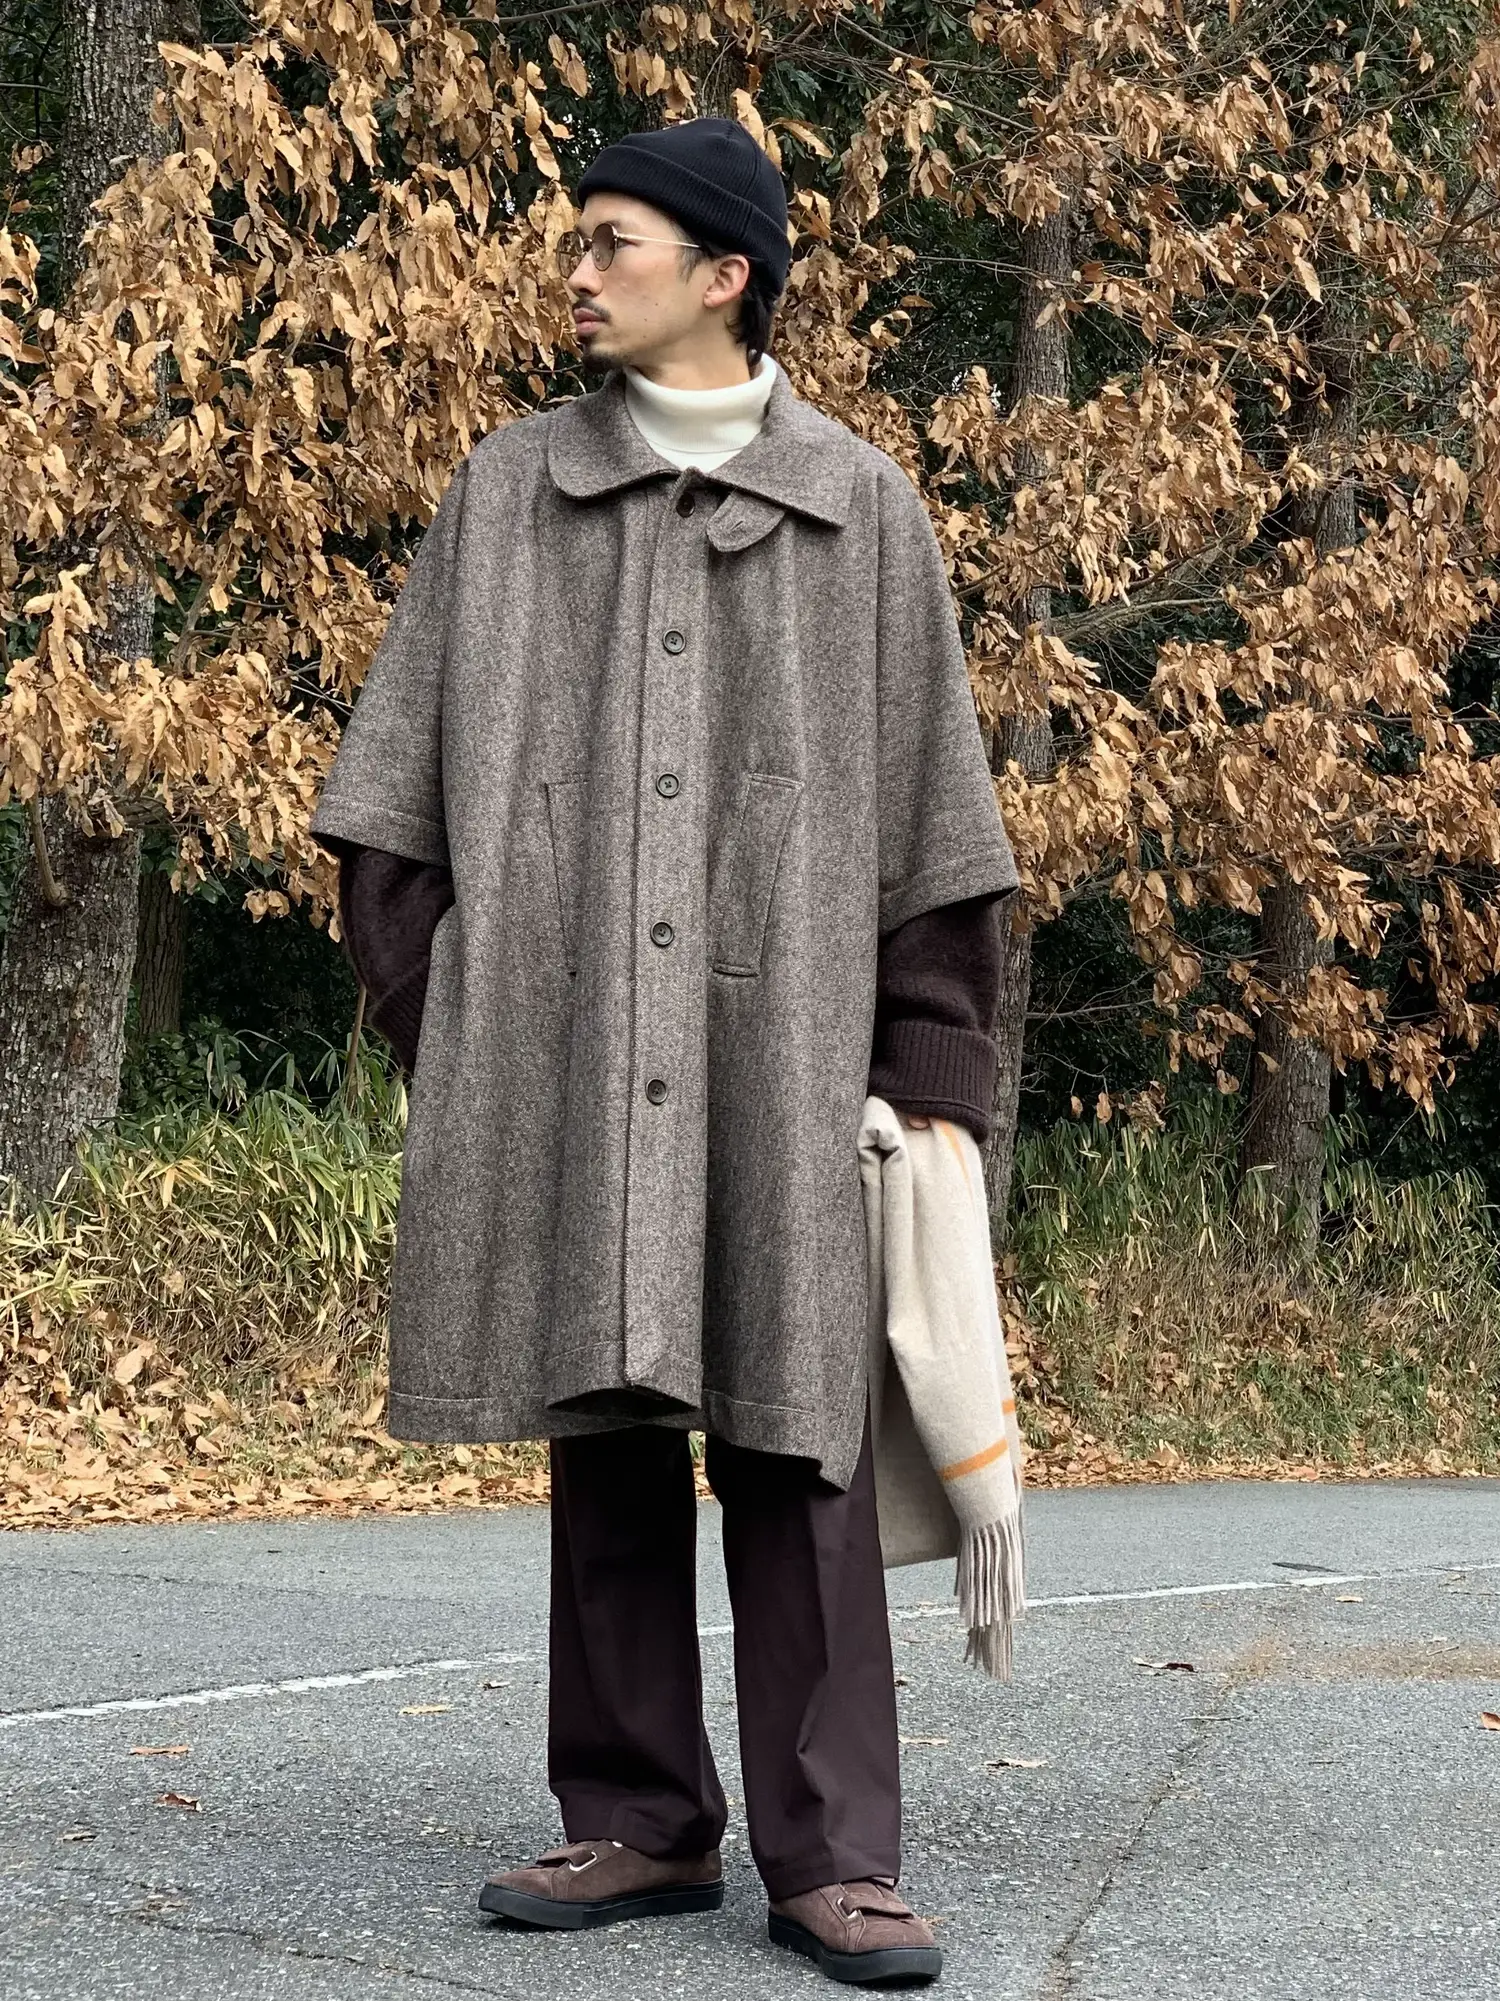 Winter cape coat coordination with brown as the main axis